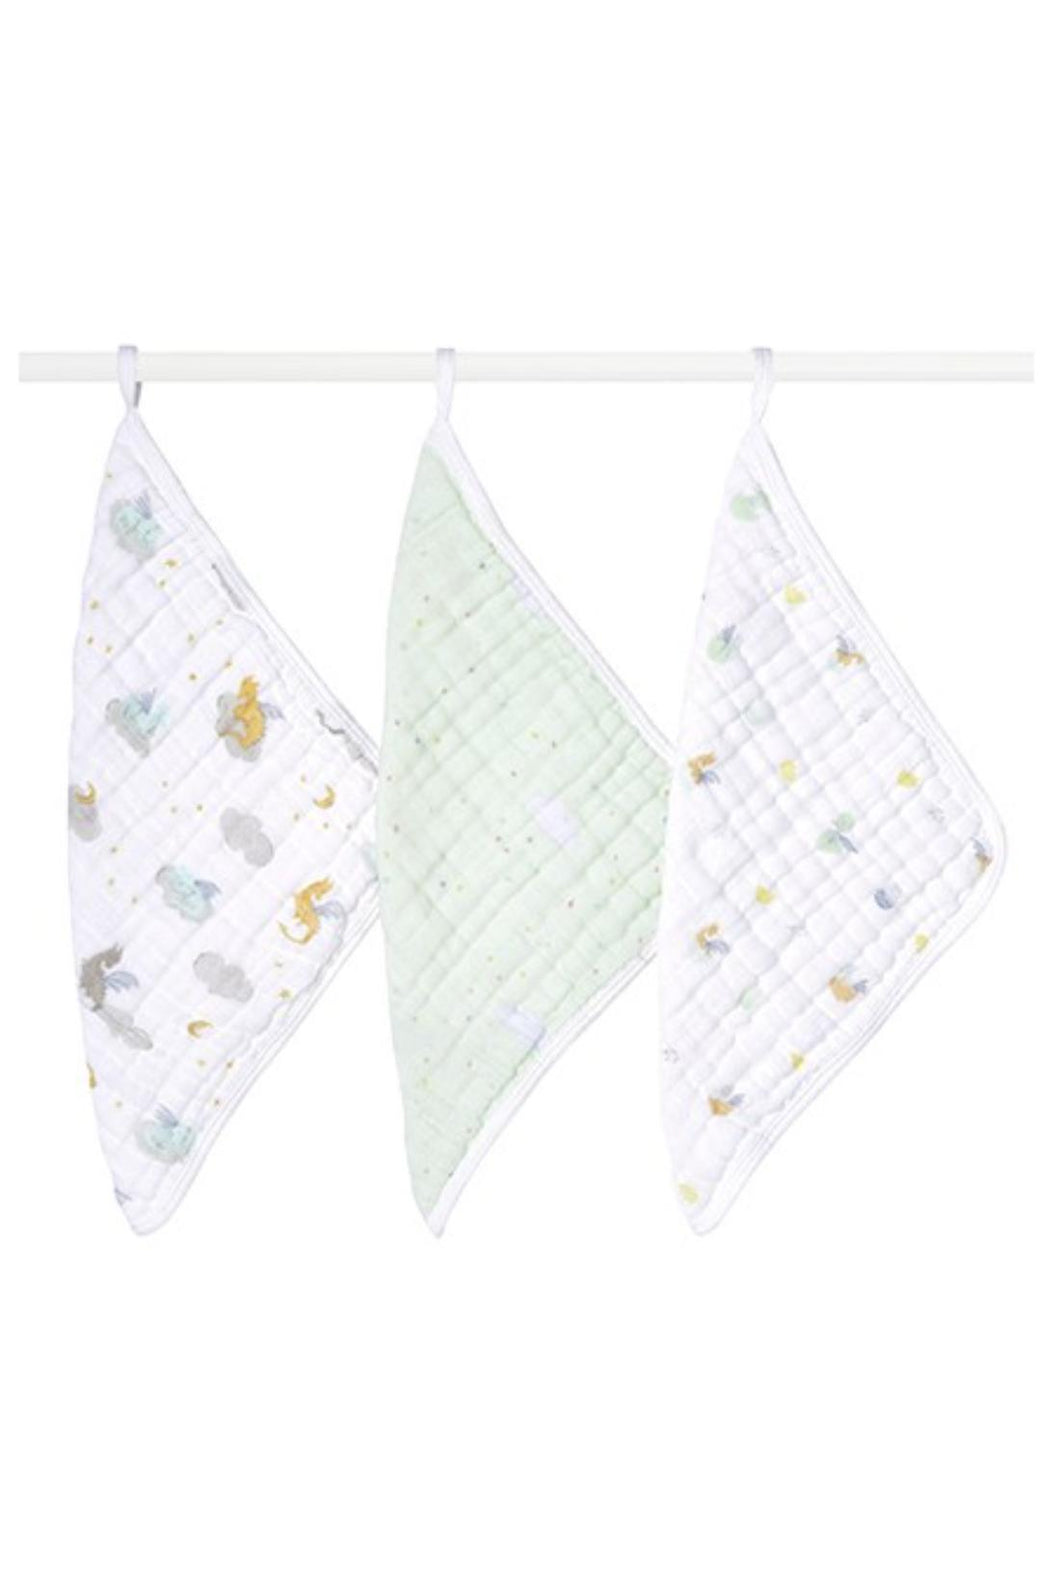 Aden + Anais Classic Cotton Washcloths 3 Pack - Year Of the Dragon